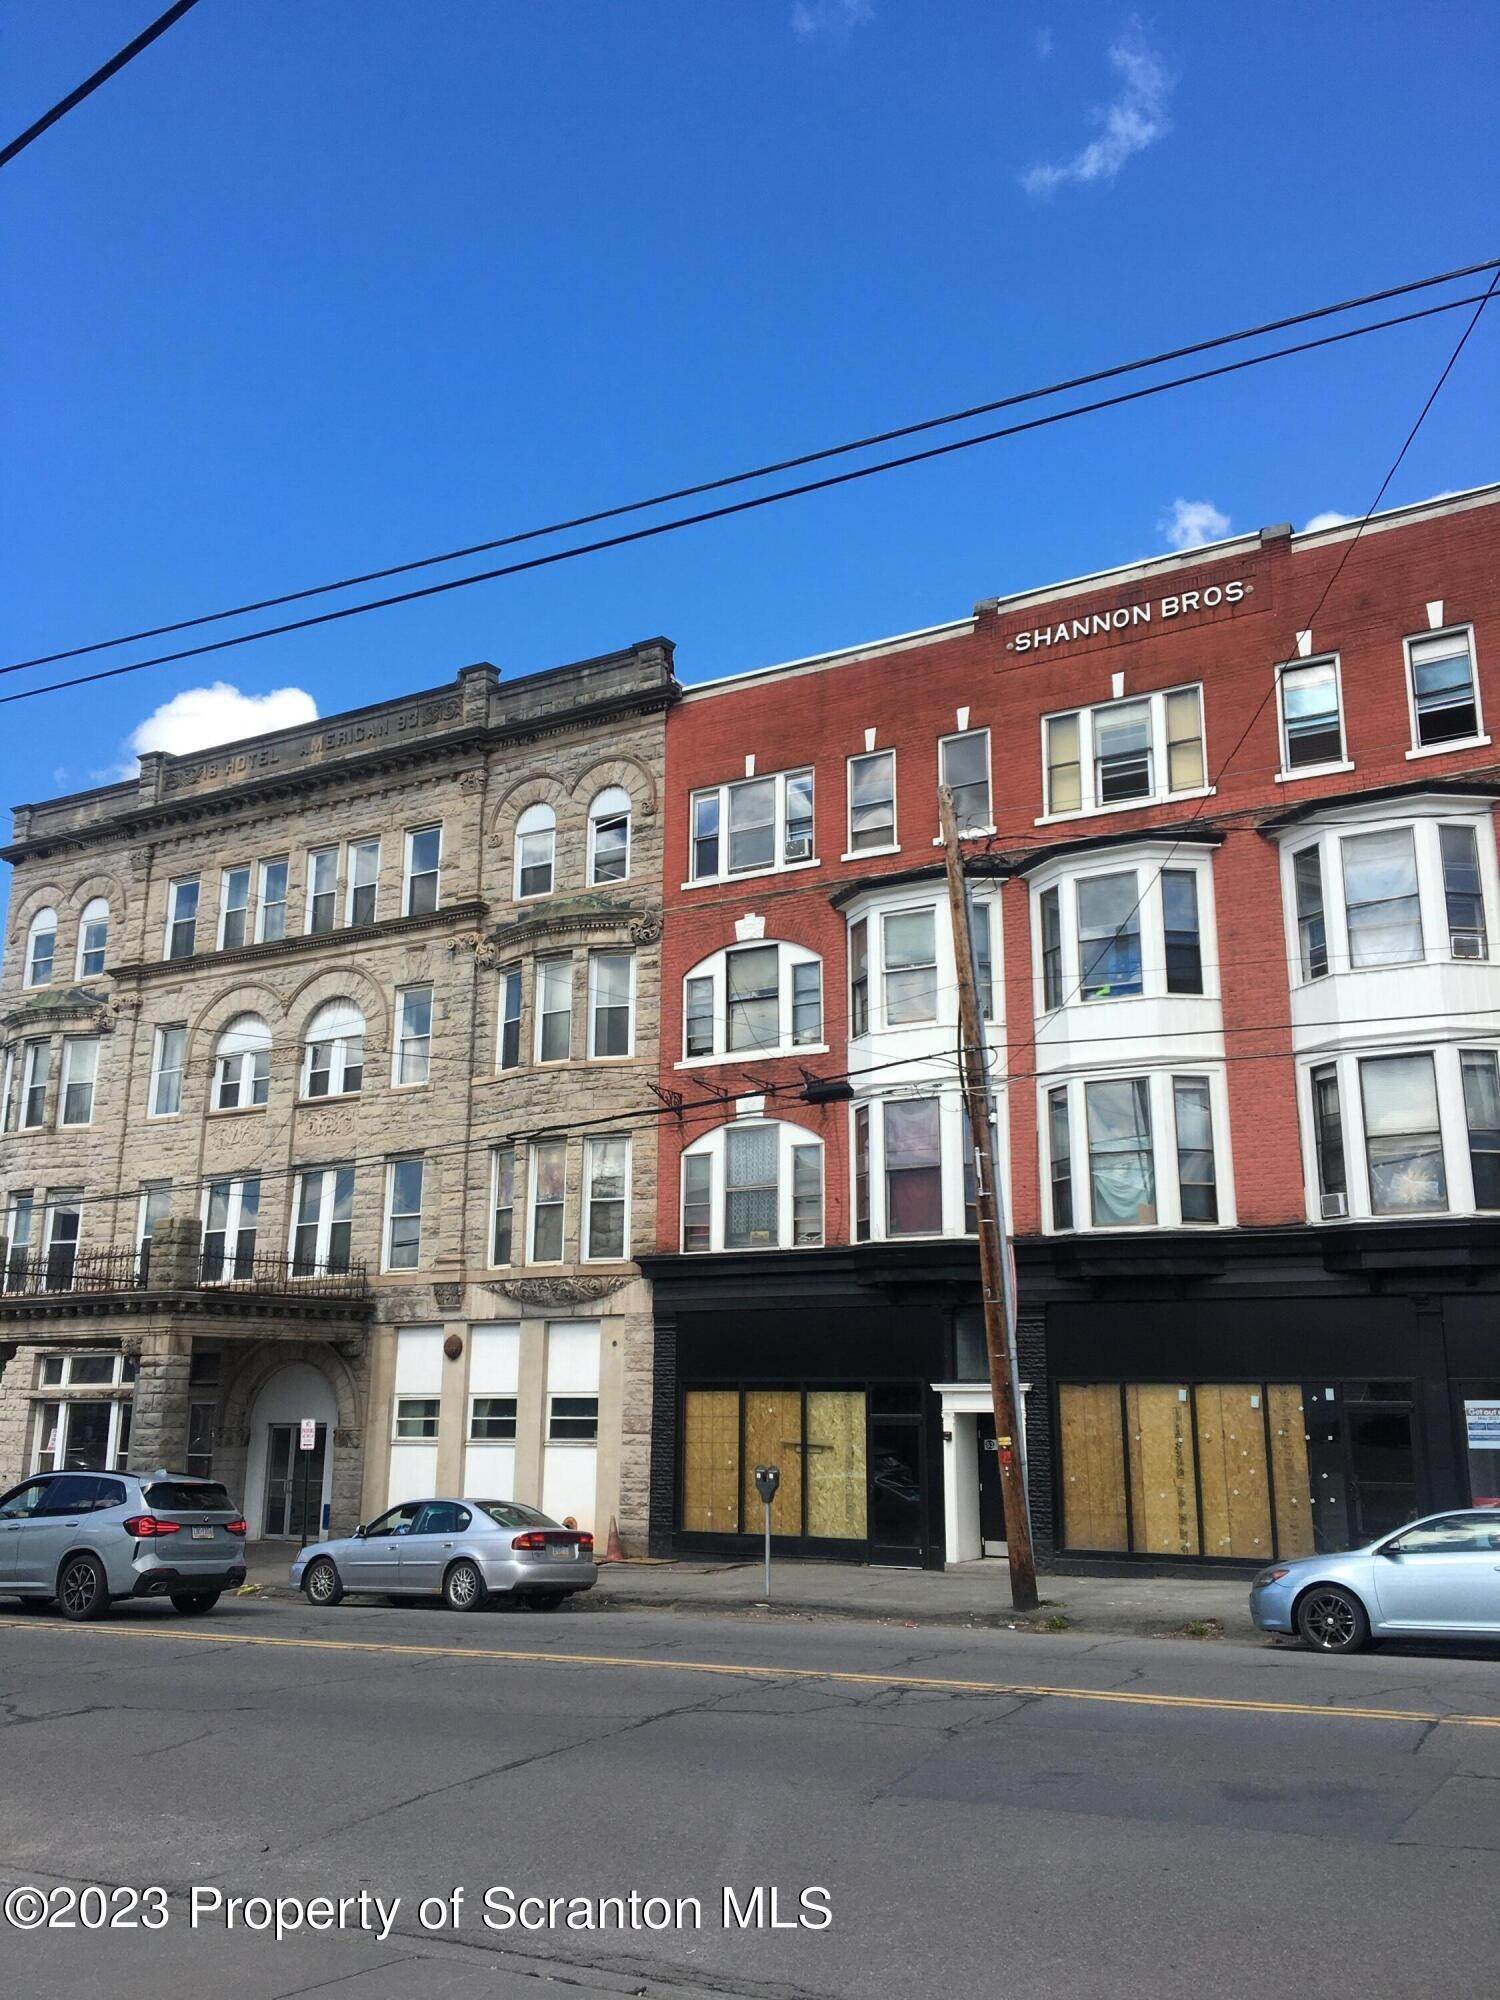 Commercial for Rent at 63 63 65 67 Main St Carbondale, Pennsylvania 18407 United States